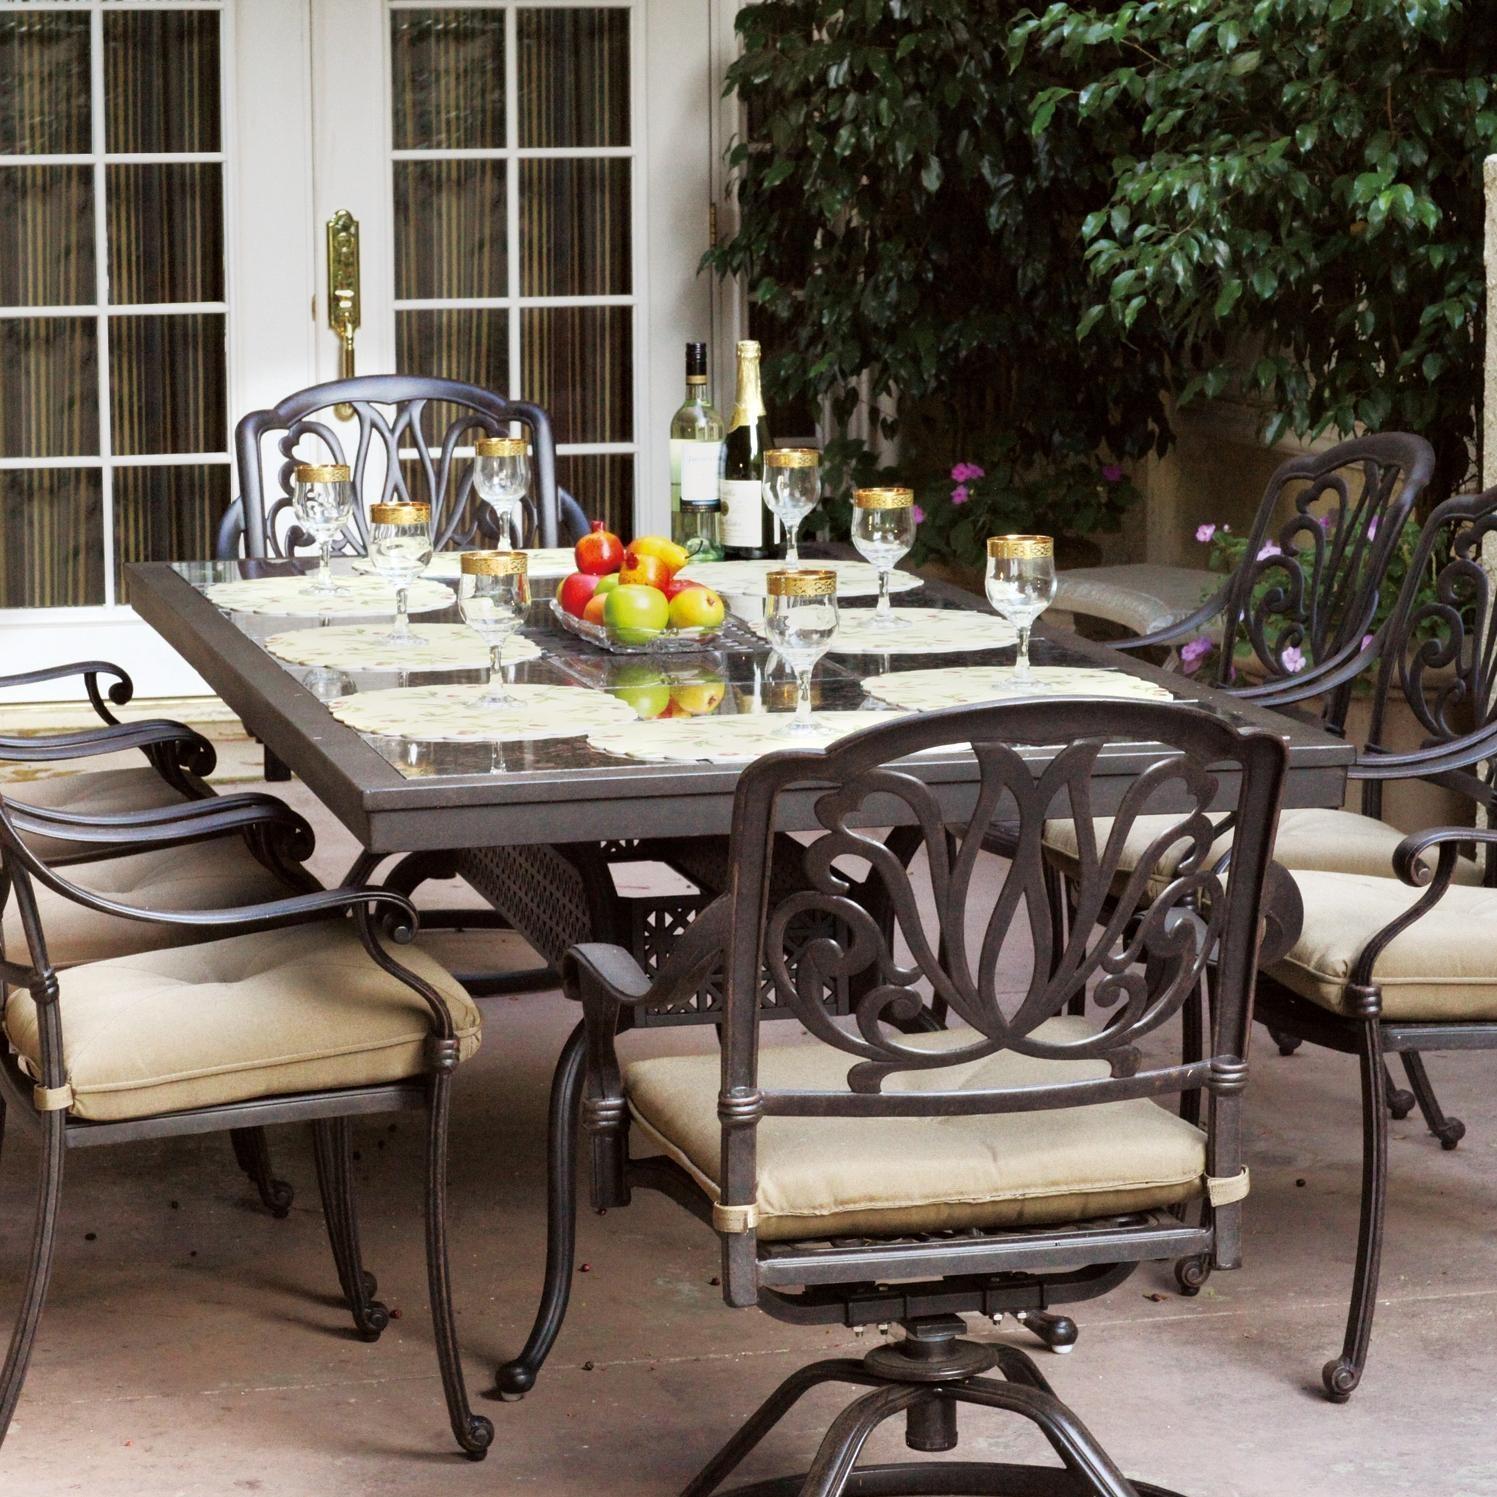 patio dining sets for 8 people photo - 9